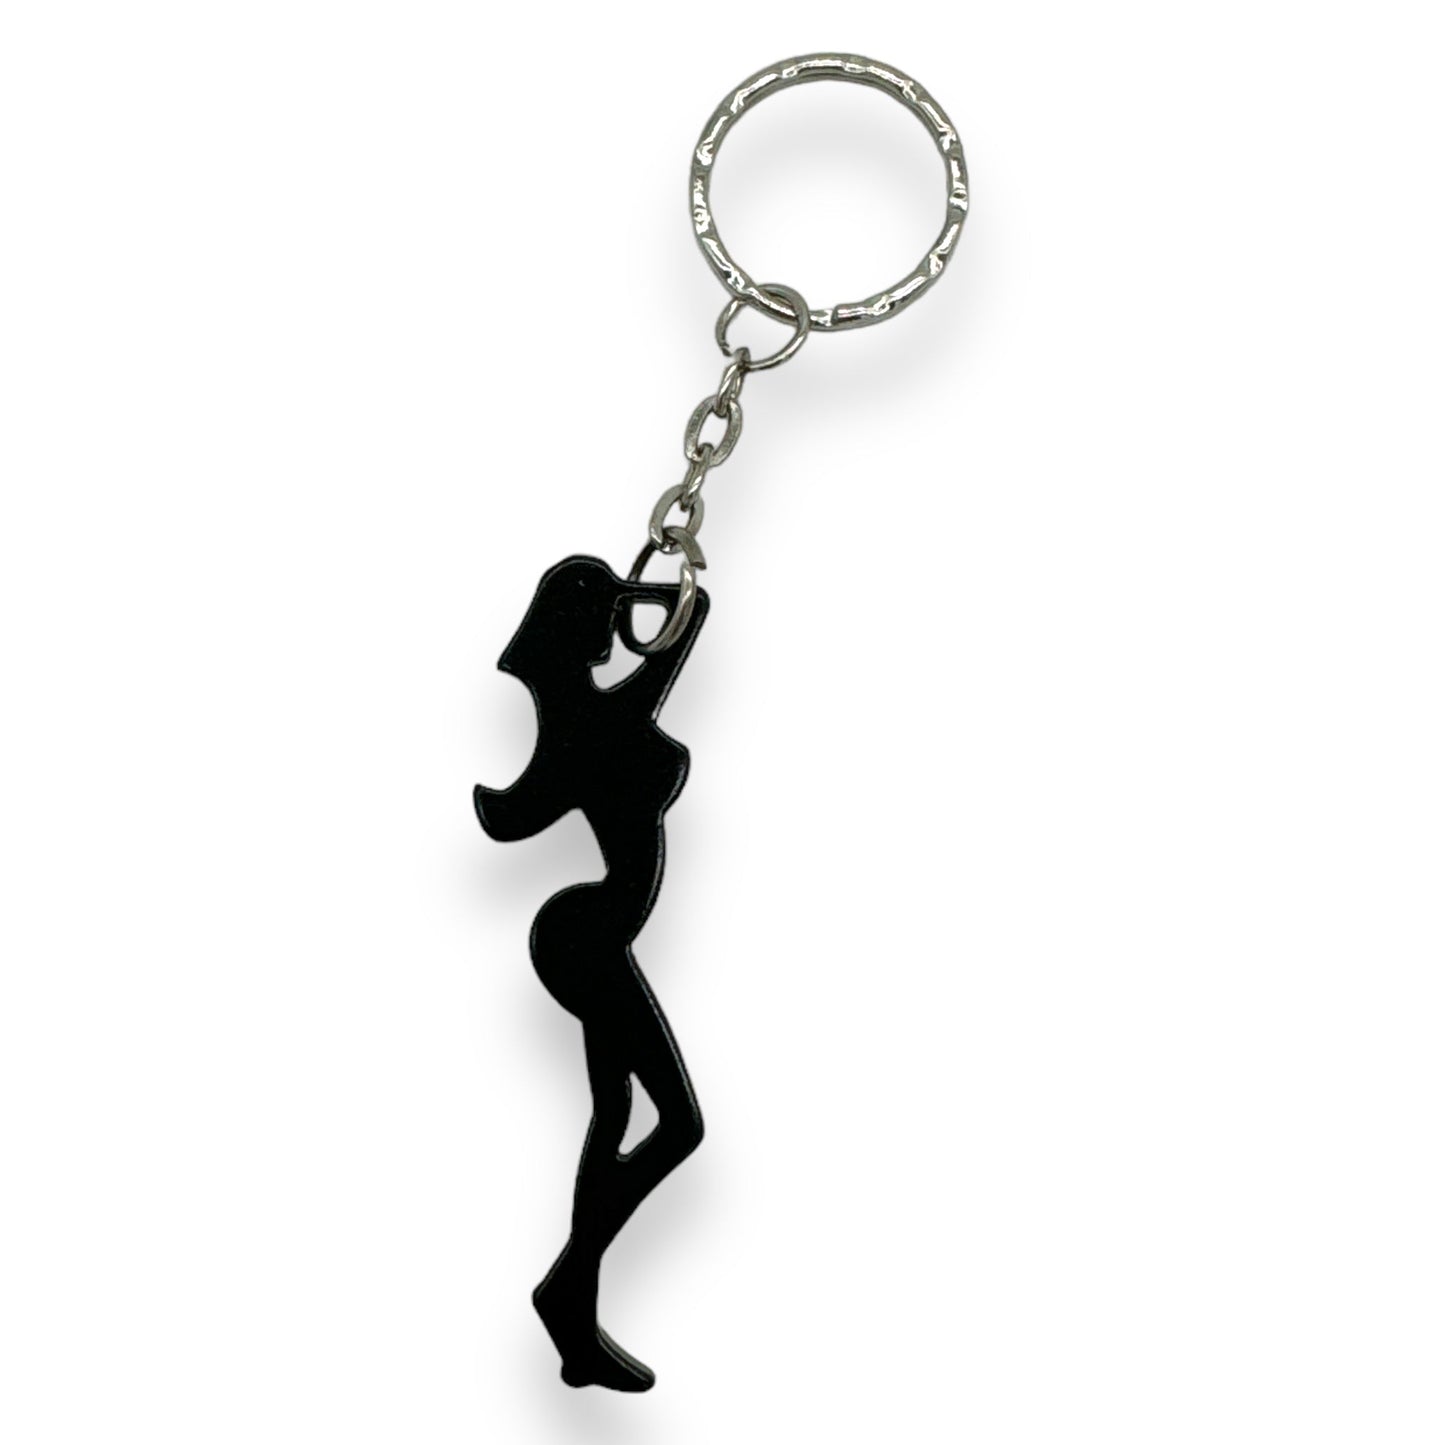 Keychain Bottle Opener Sexy Woman In 5 Colors 